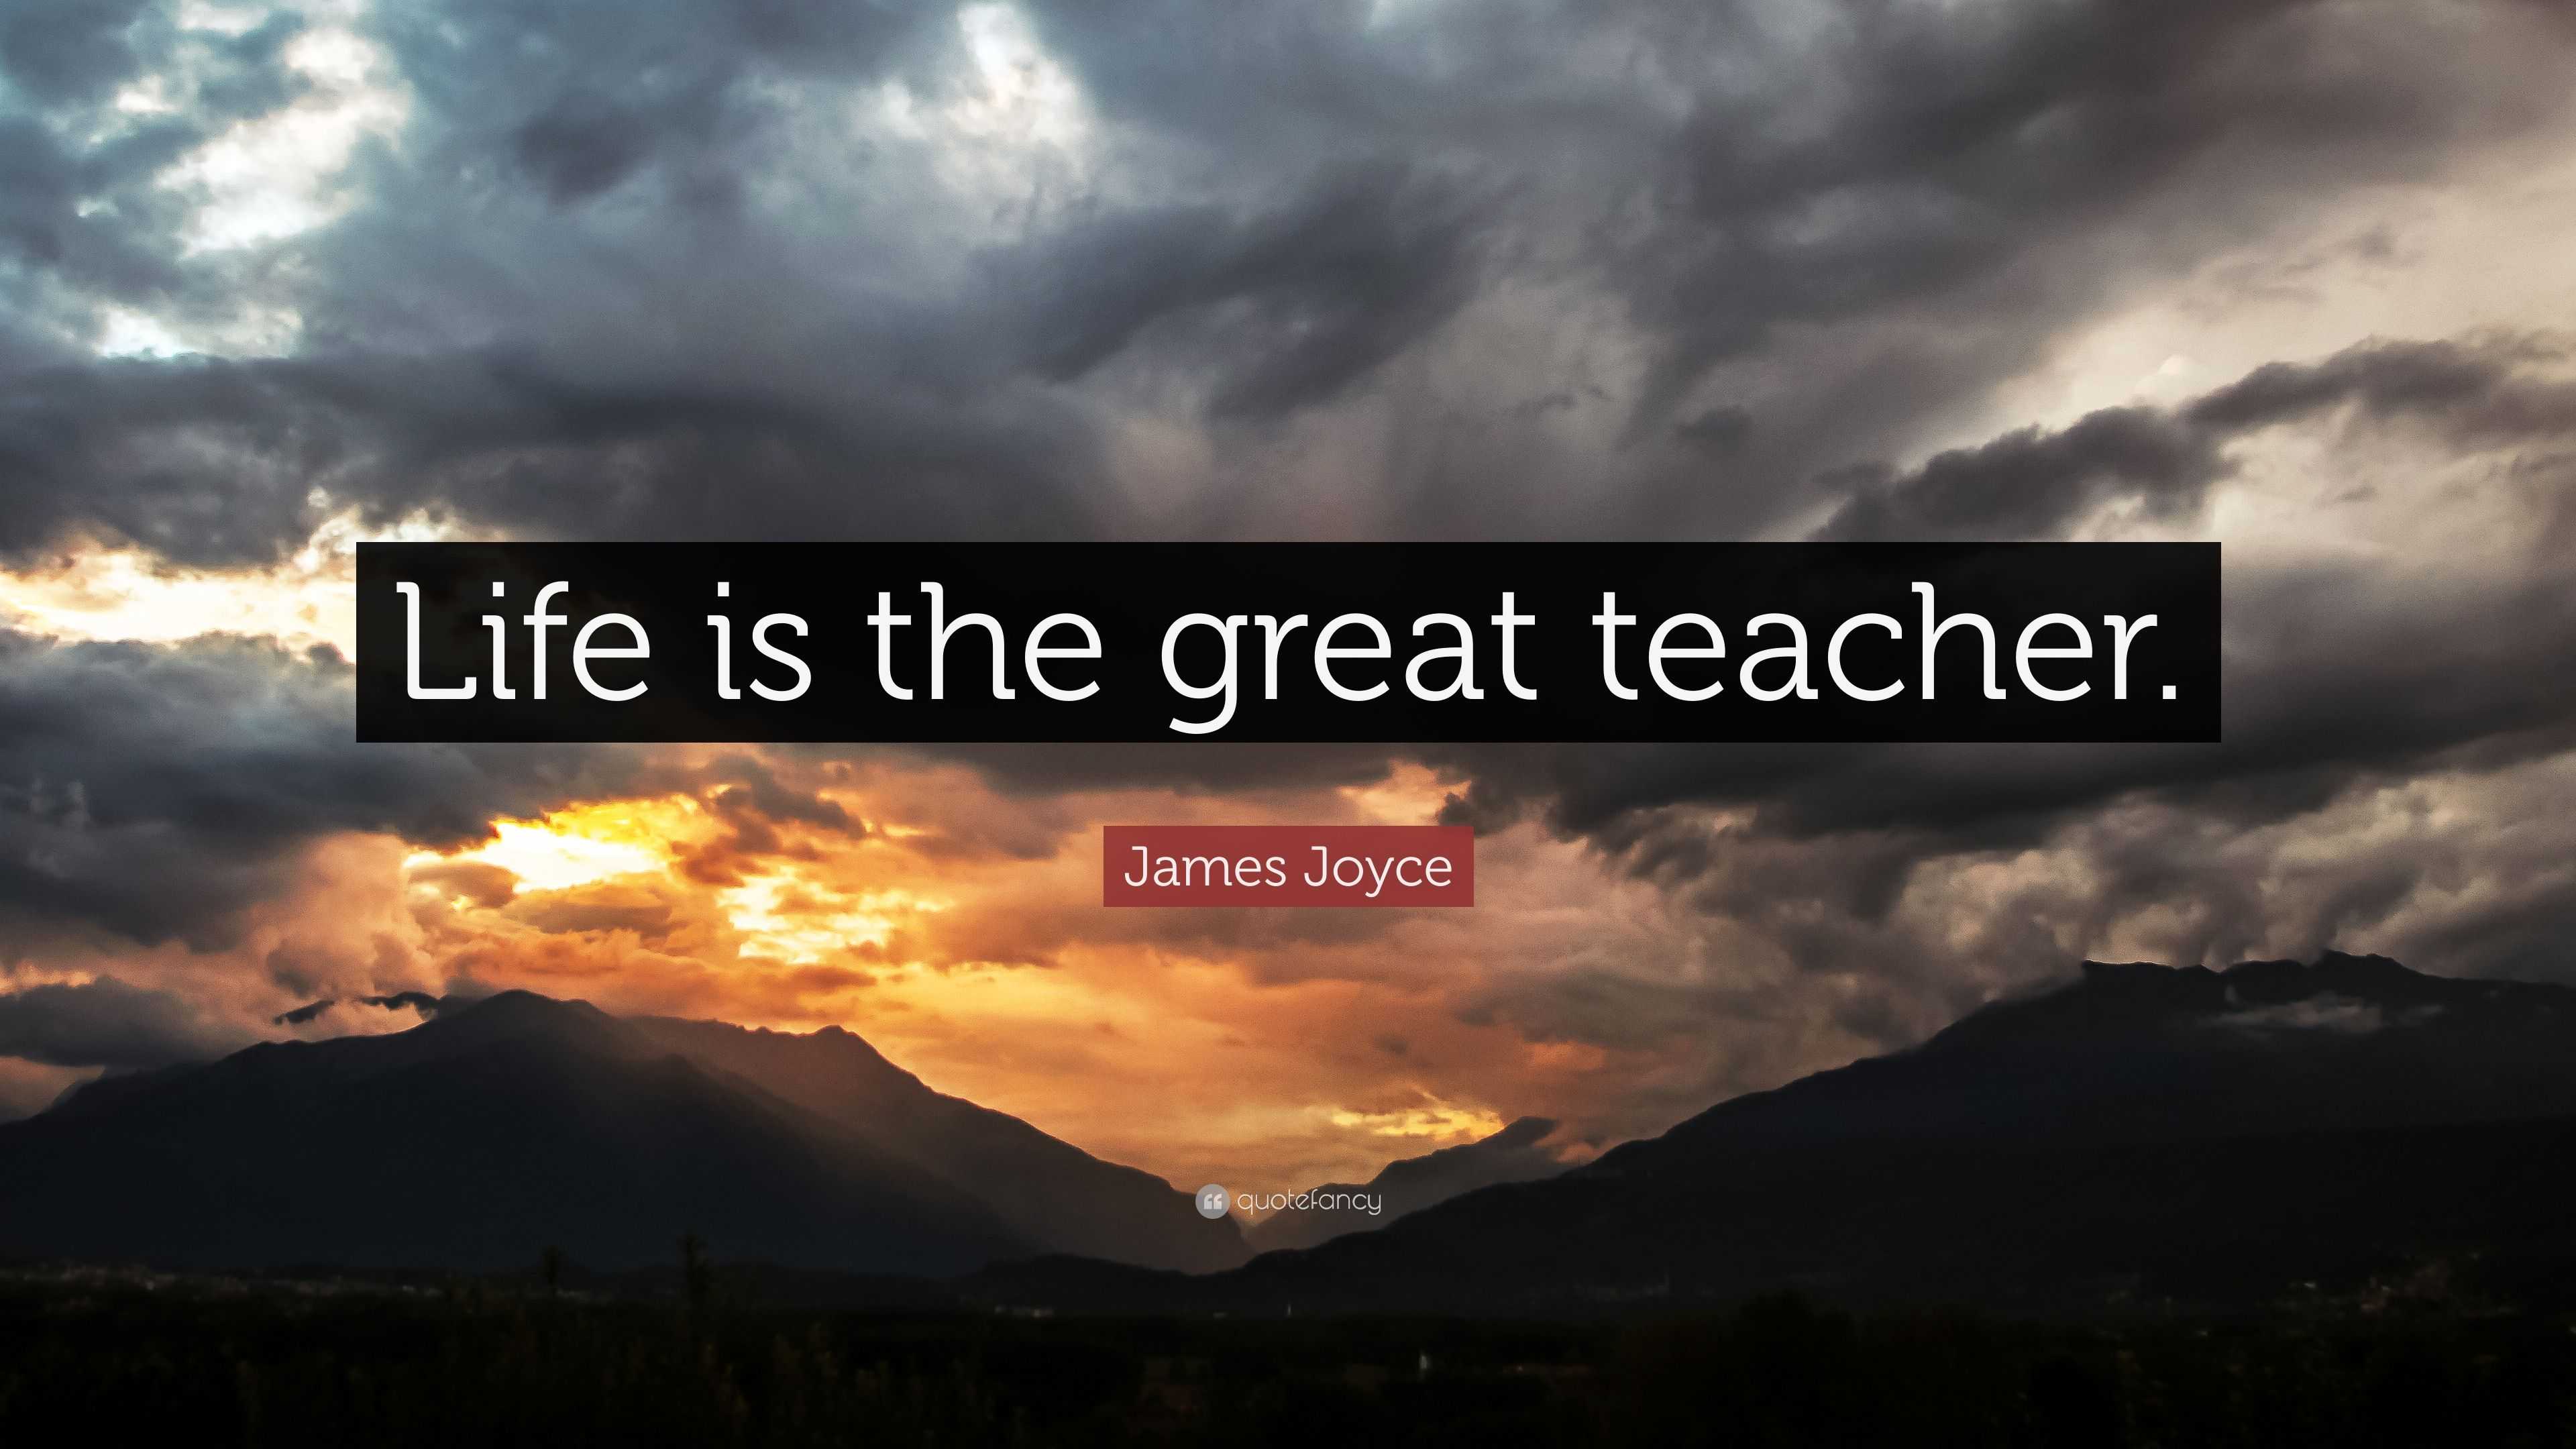 James Joyce Quote: “Life is the great teacher.”